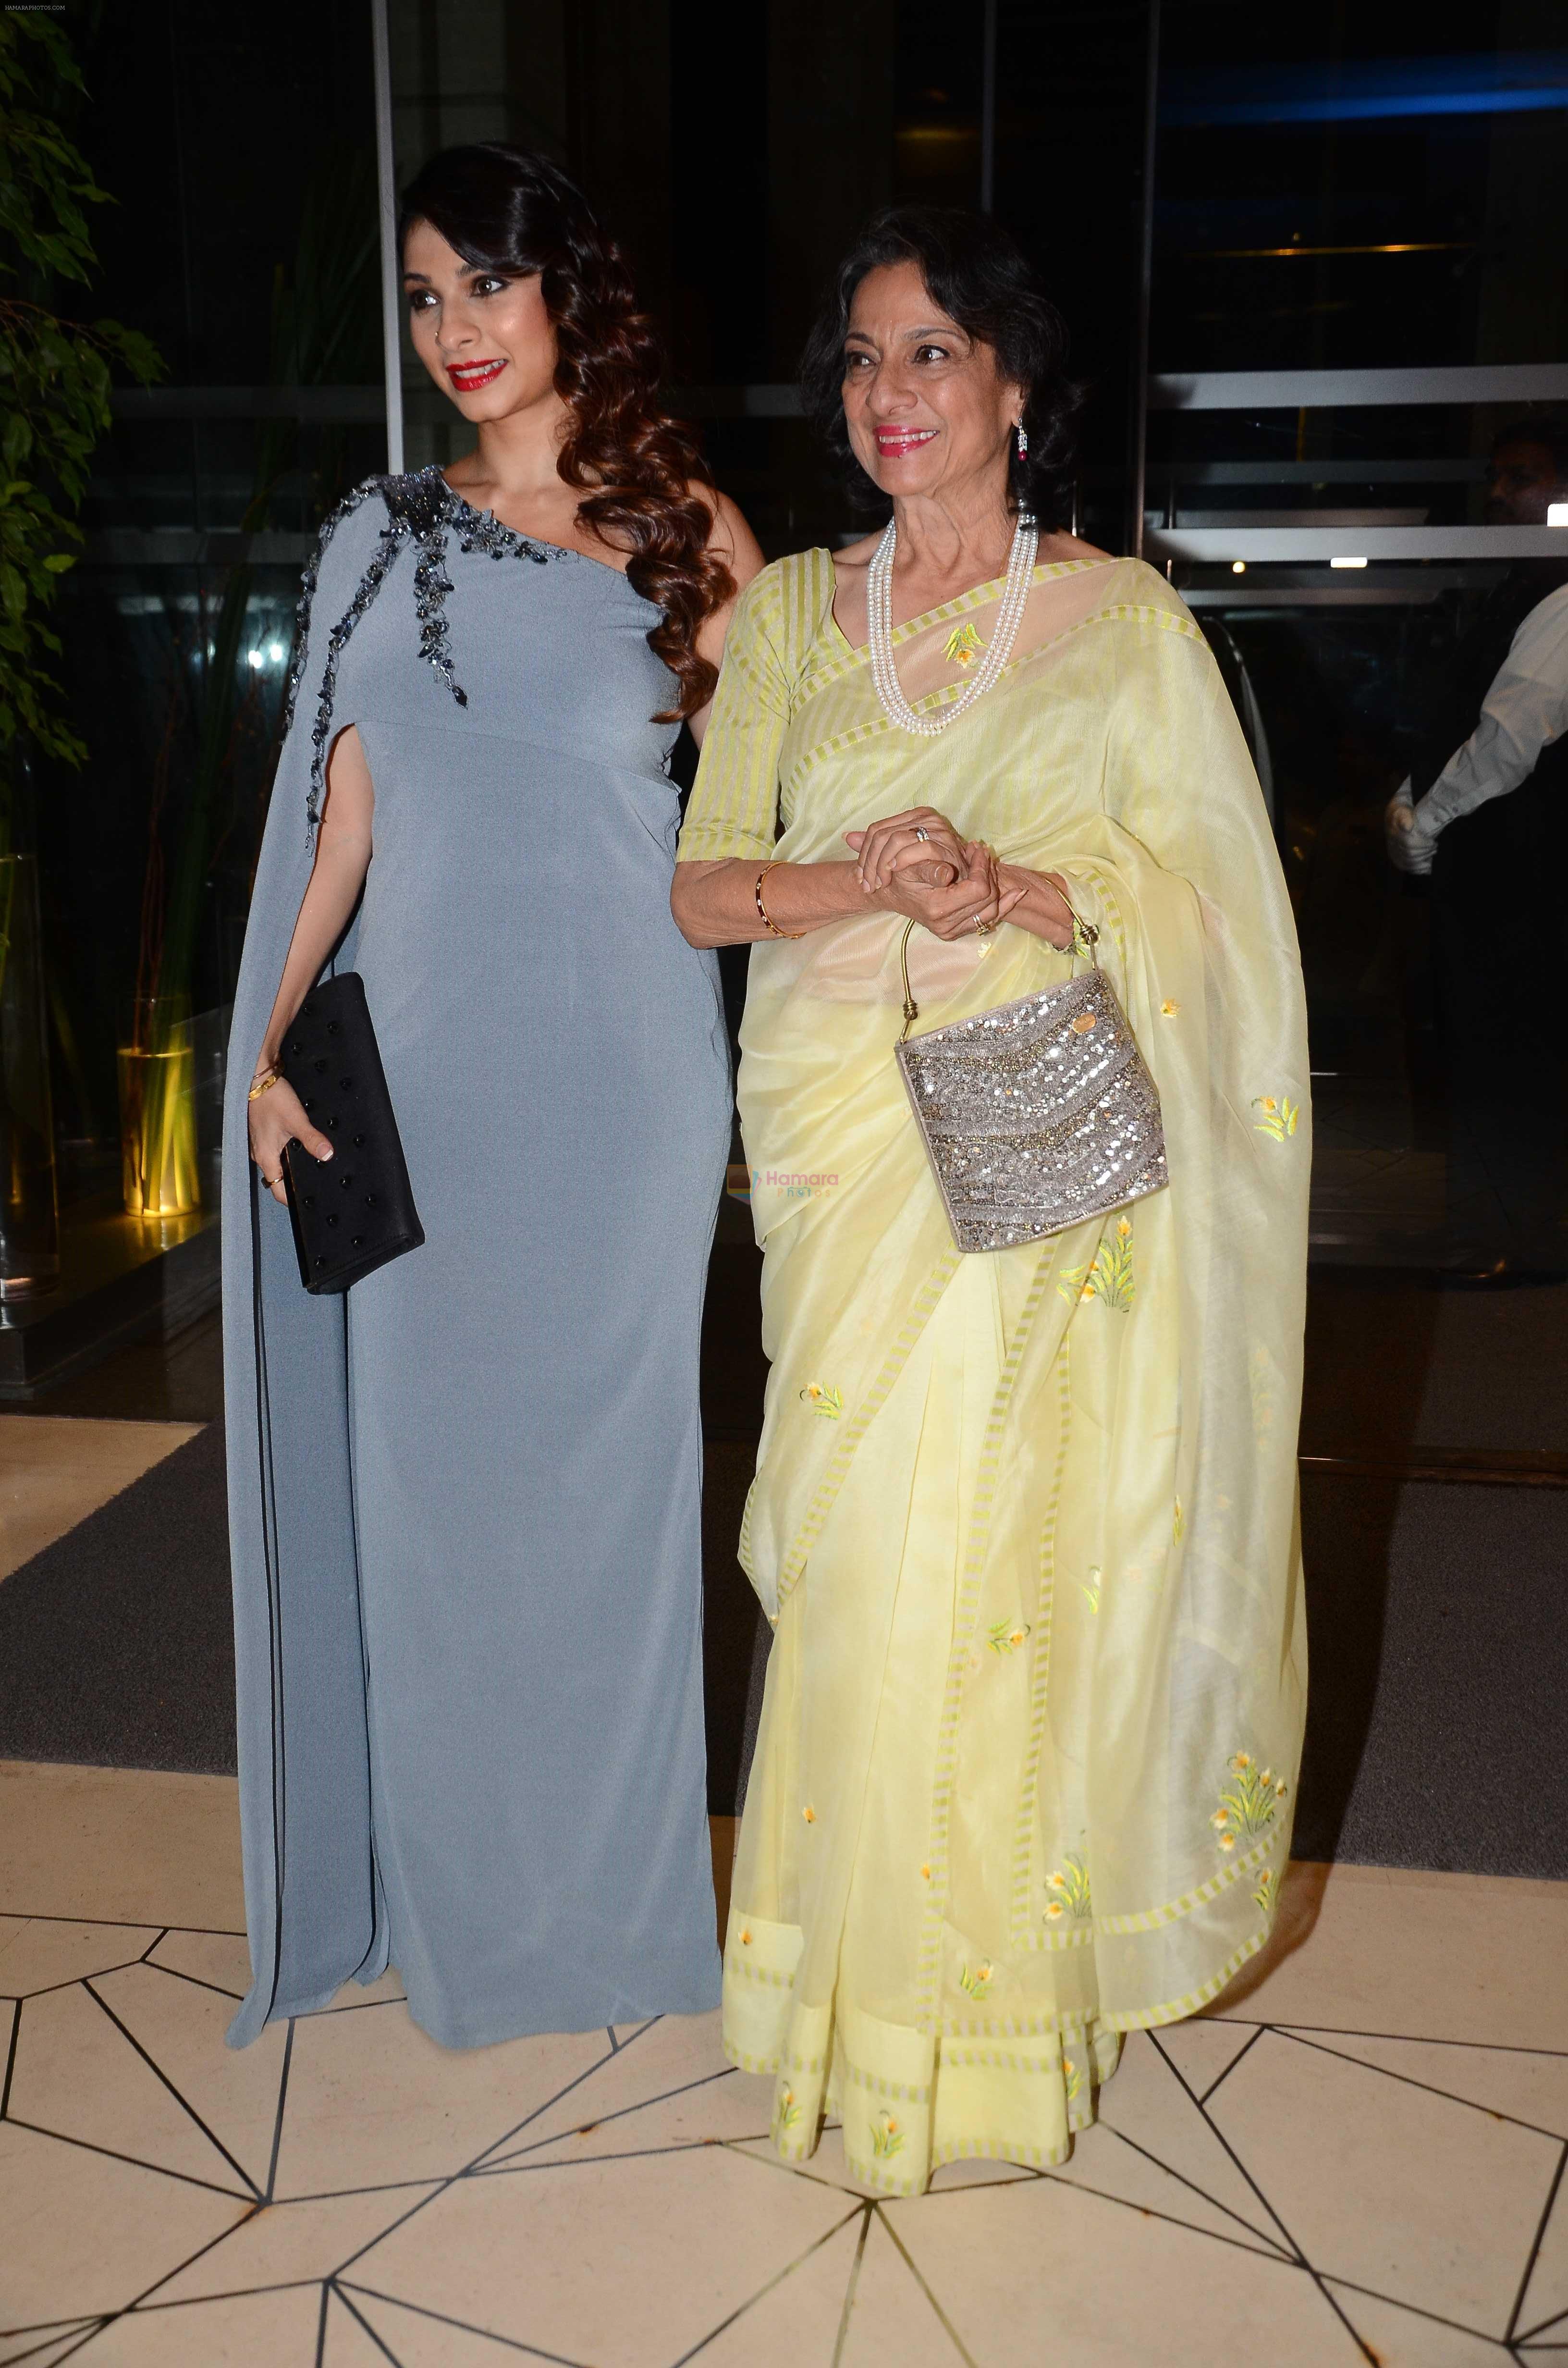 Tanishaa Mukerji with mother Tanuja during the party orgnised by Tanishaa Mukerji on behalf of her NGO STAMP in Mumbai, India on July 23, 2016